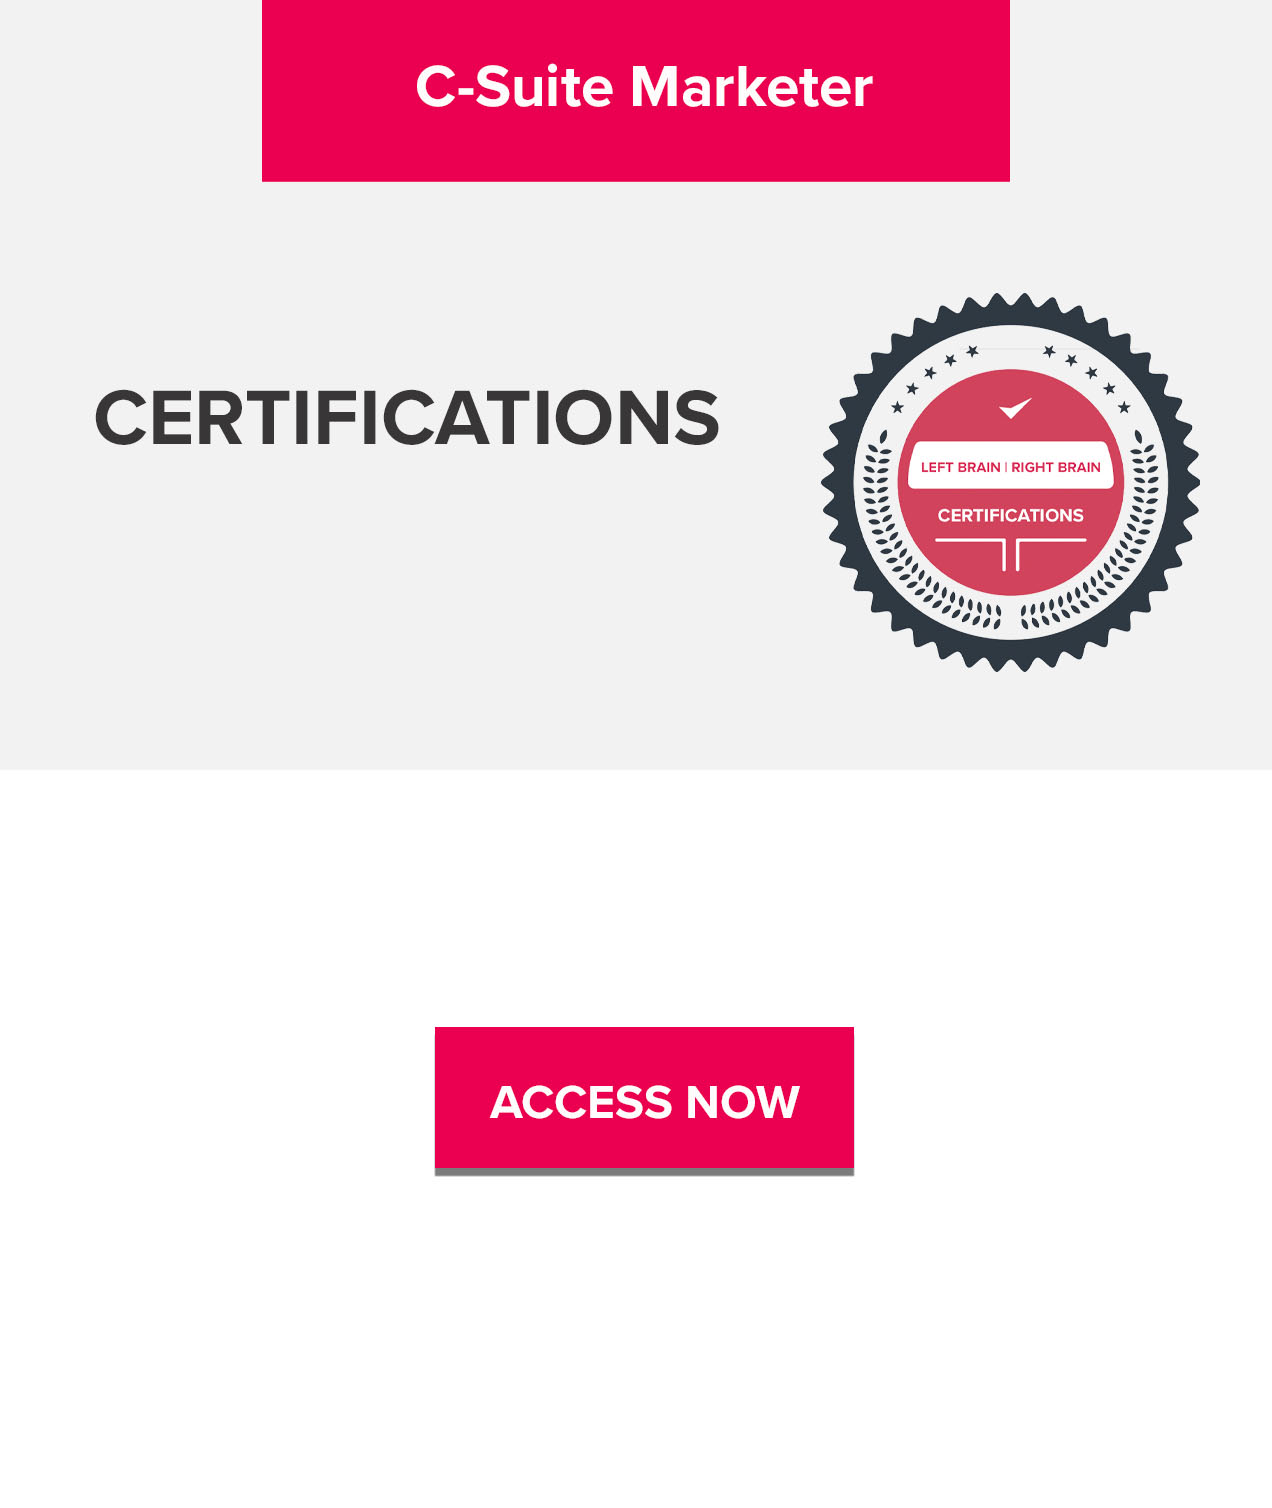 CMO Dashboard Preview C-Suite Marketer Certification